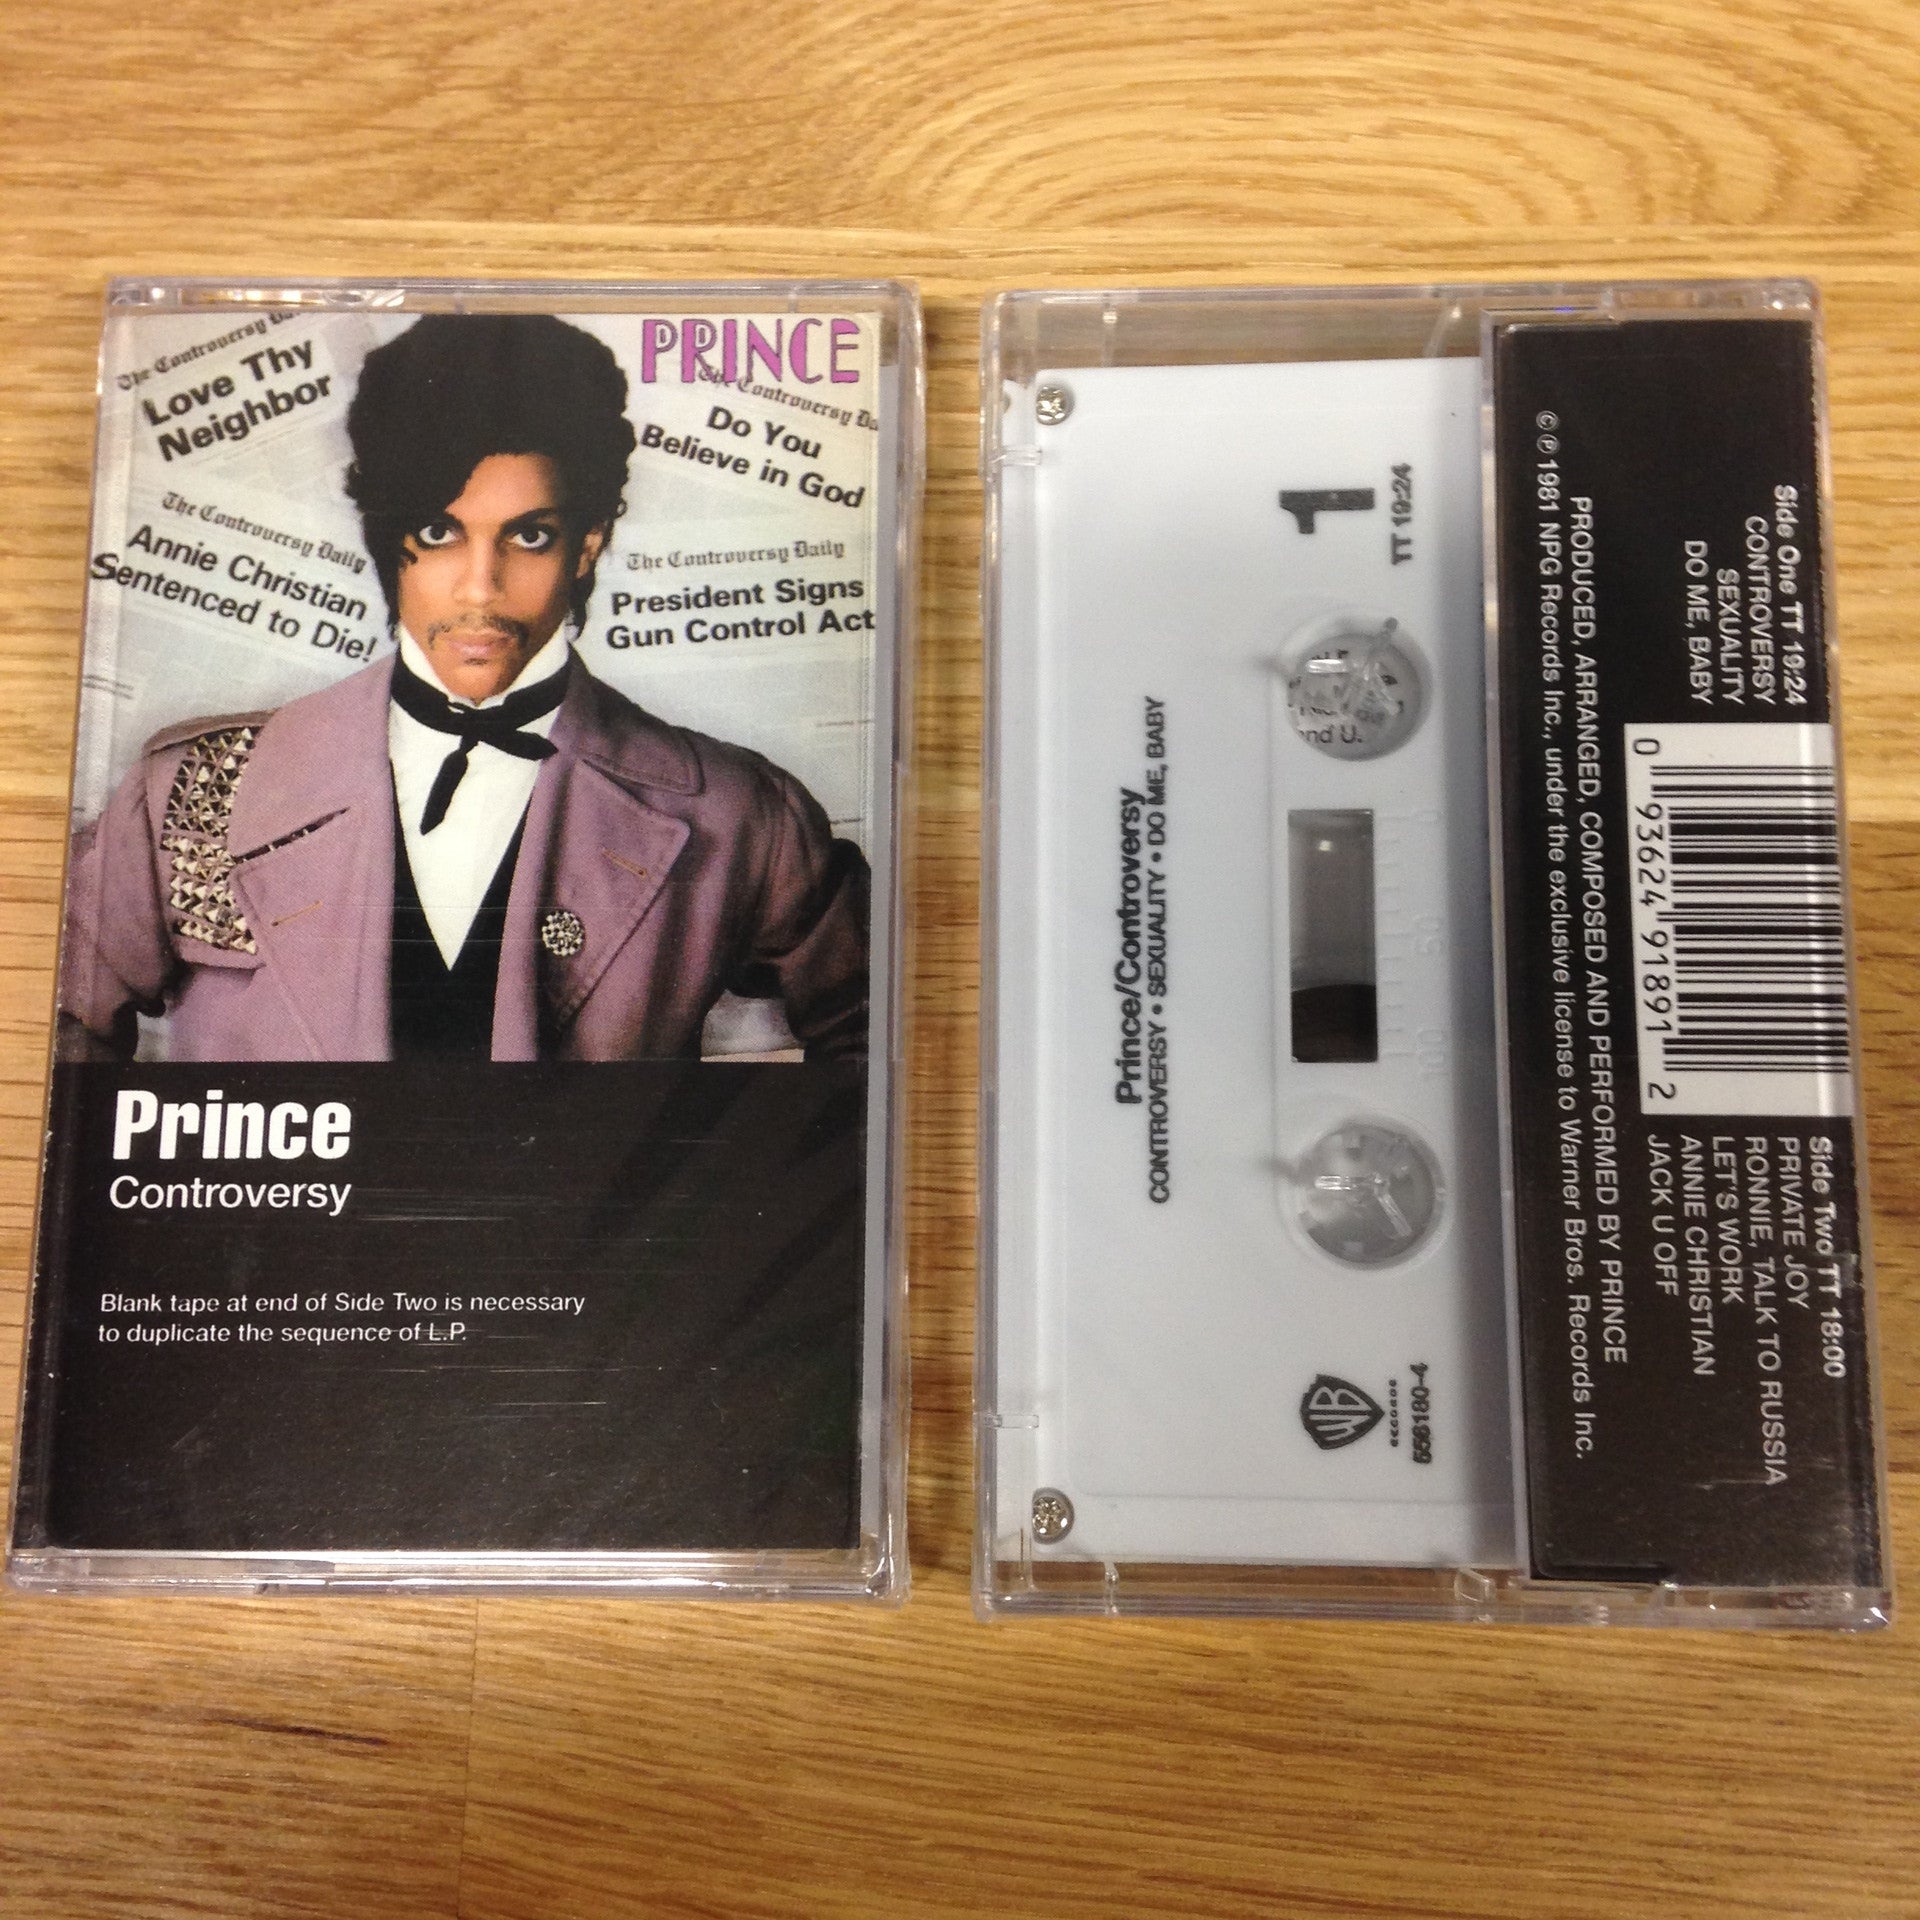 Prince - Controversy (1981) - New Cassette - 2016 Warner White Tape - Pop / Rock / Purple Lord